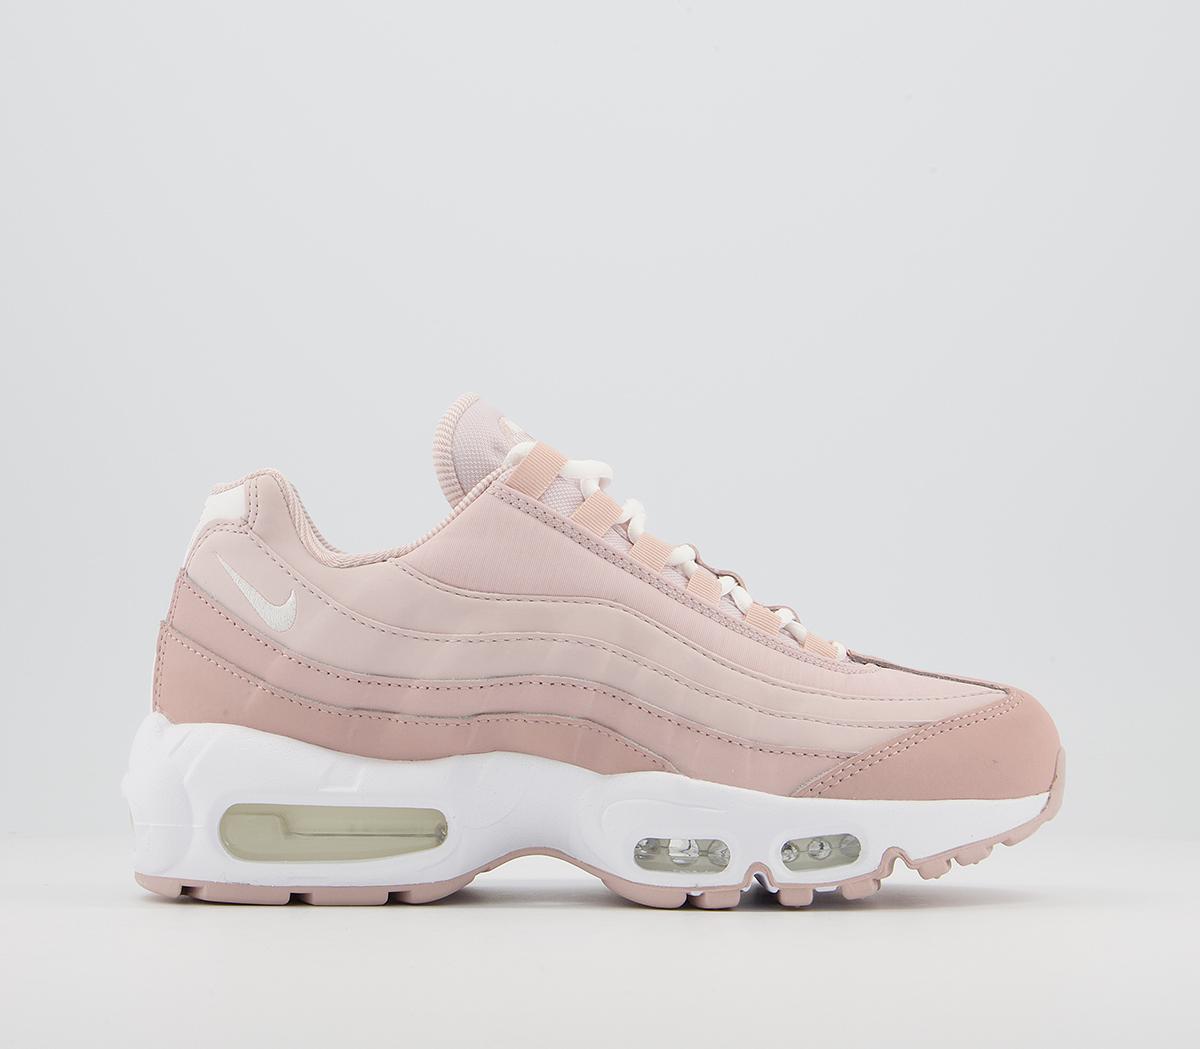 NikeAir Max 95 TrainersPink Oxford Summit White Barely Rose White